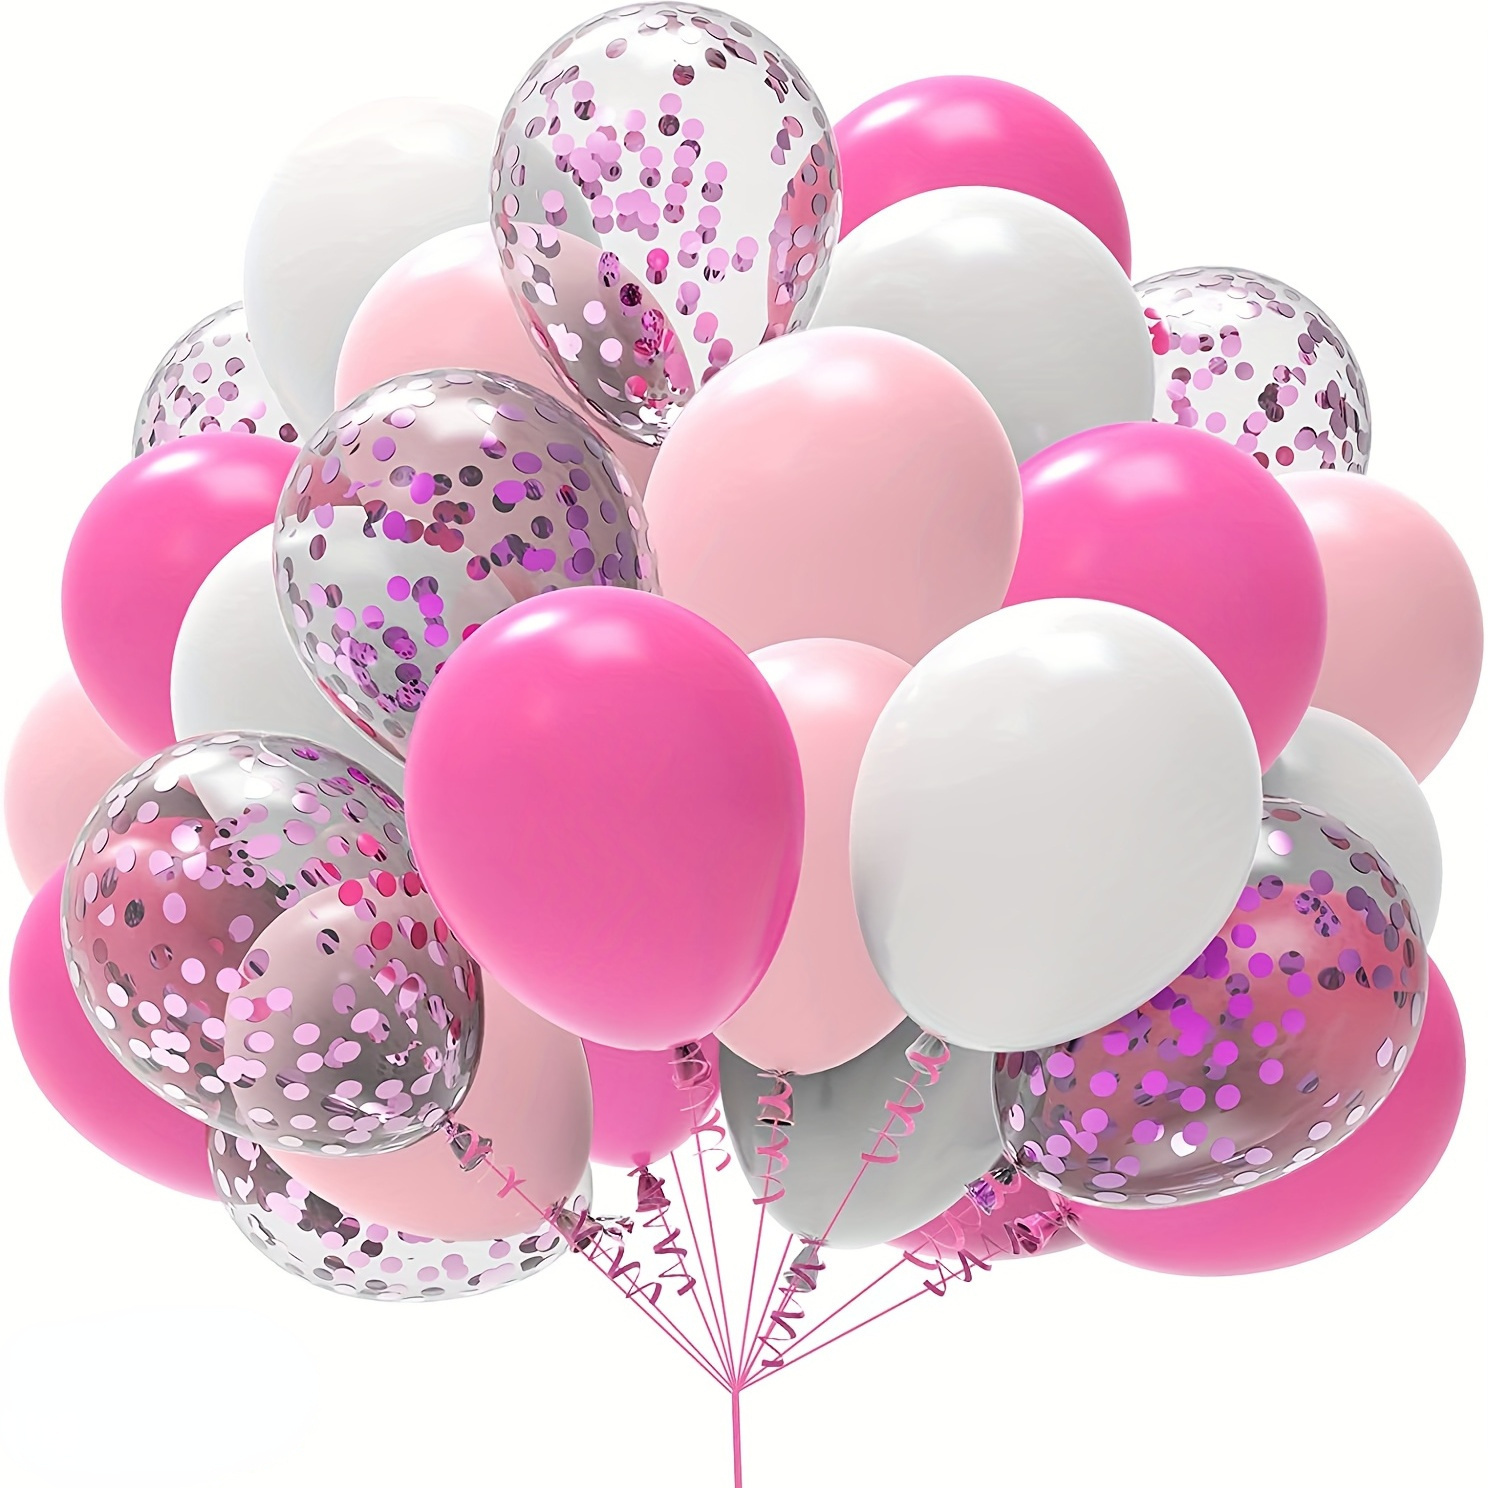 

60-piece Hot Pink & White Latex Balloon Set With Confetti - Perfect For Weddings, Bridal Showers, Birthdays, Graduations & More - No Power Needed, Ages 14+ Elevate Your Party Decor